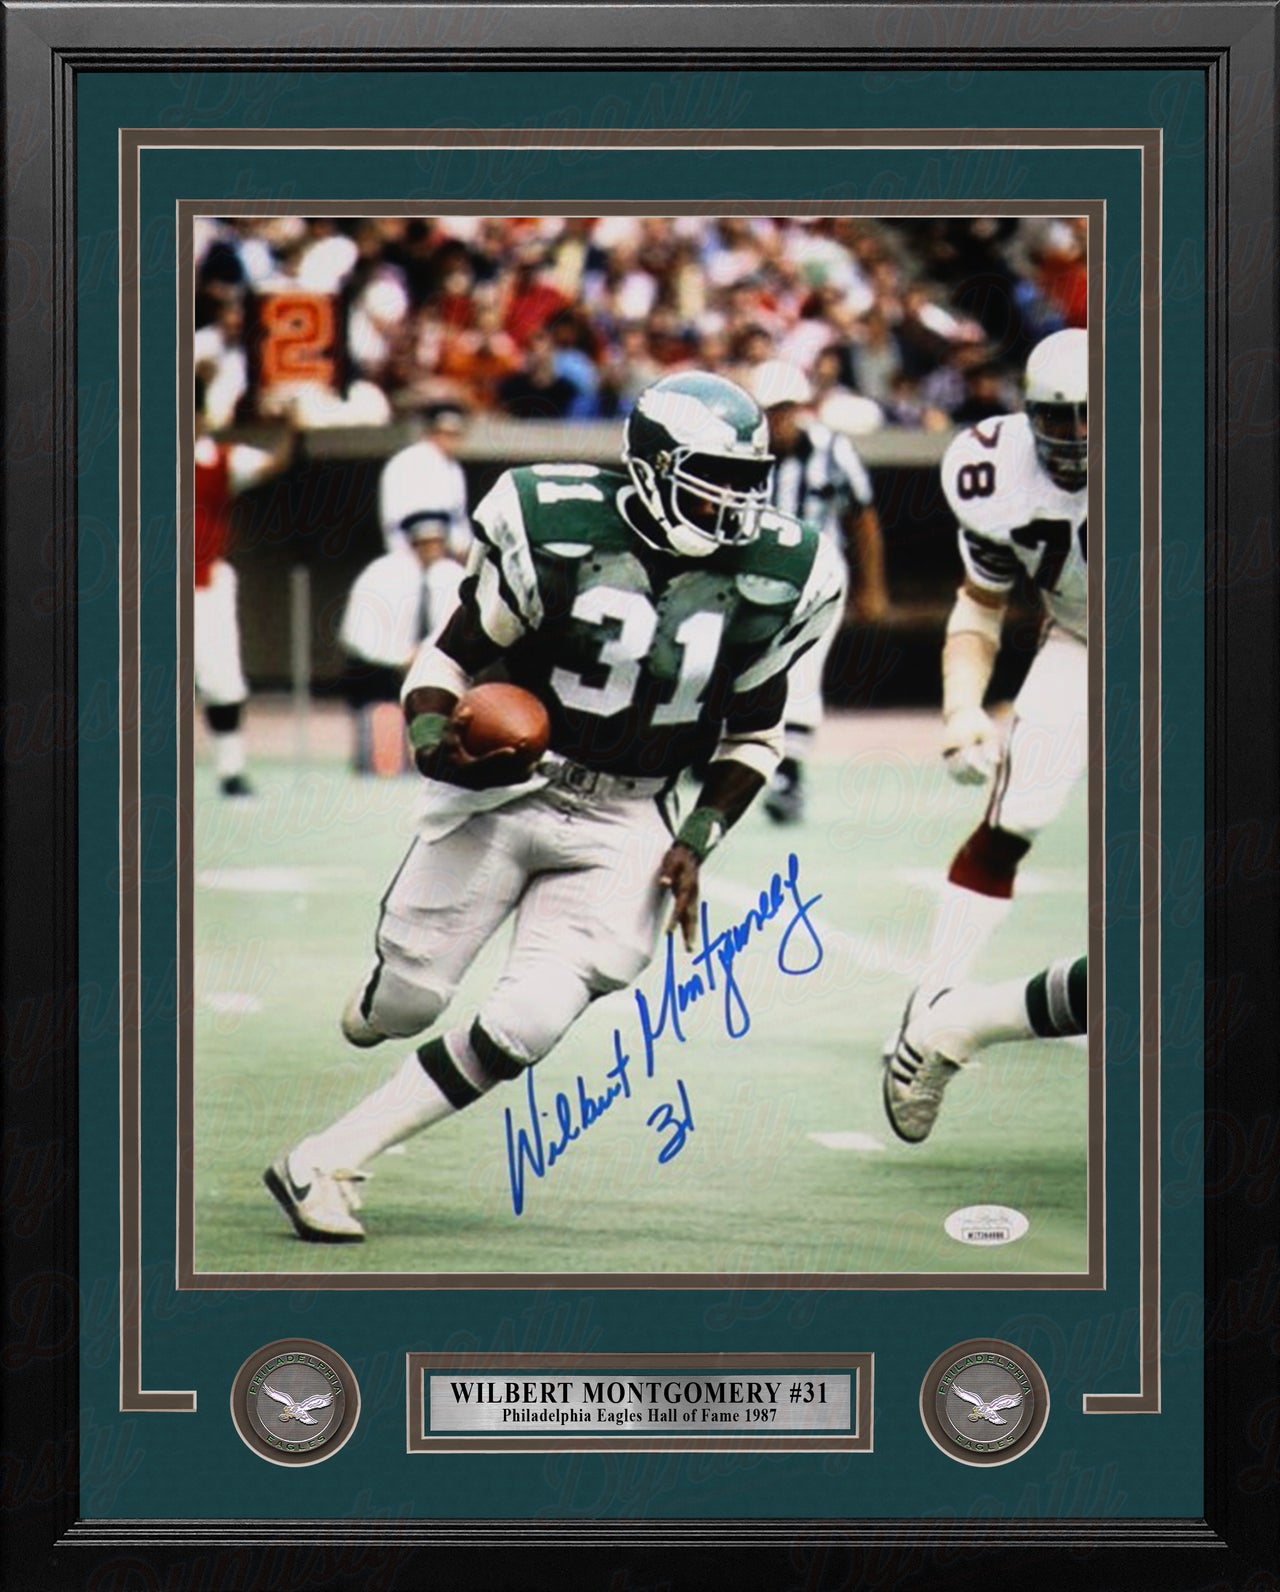 Wilbert Montgomery in Action Philadelphia Eagles Autographed 11x14 Framed Football Photo - Dynasty Sports & Framing 